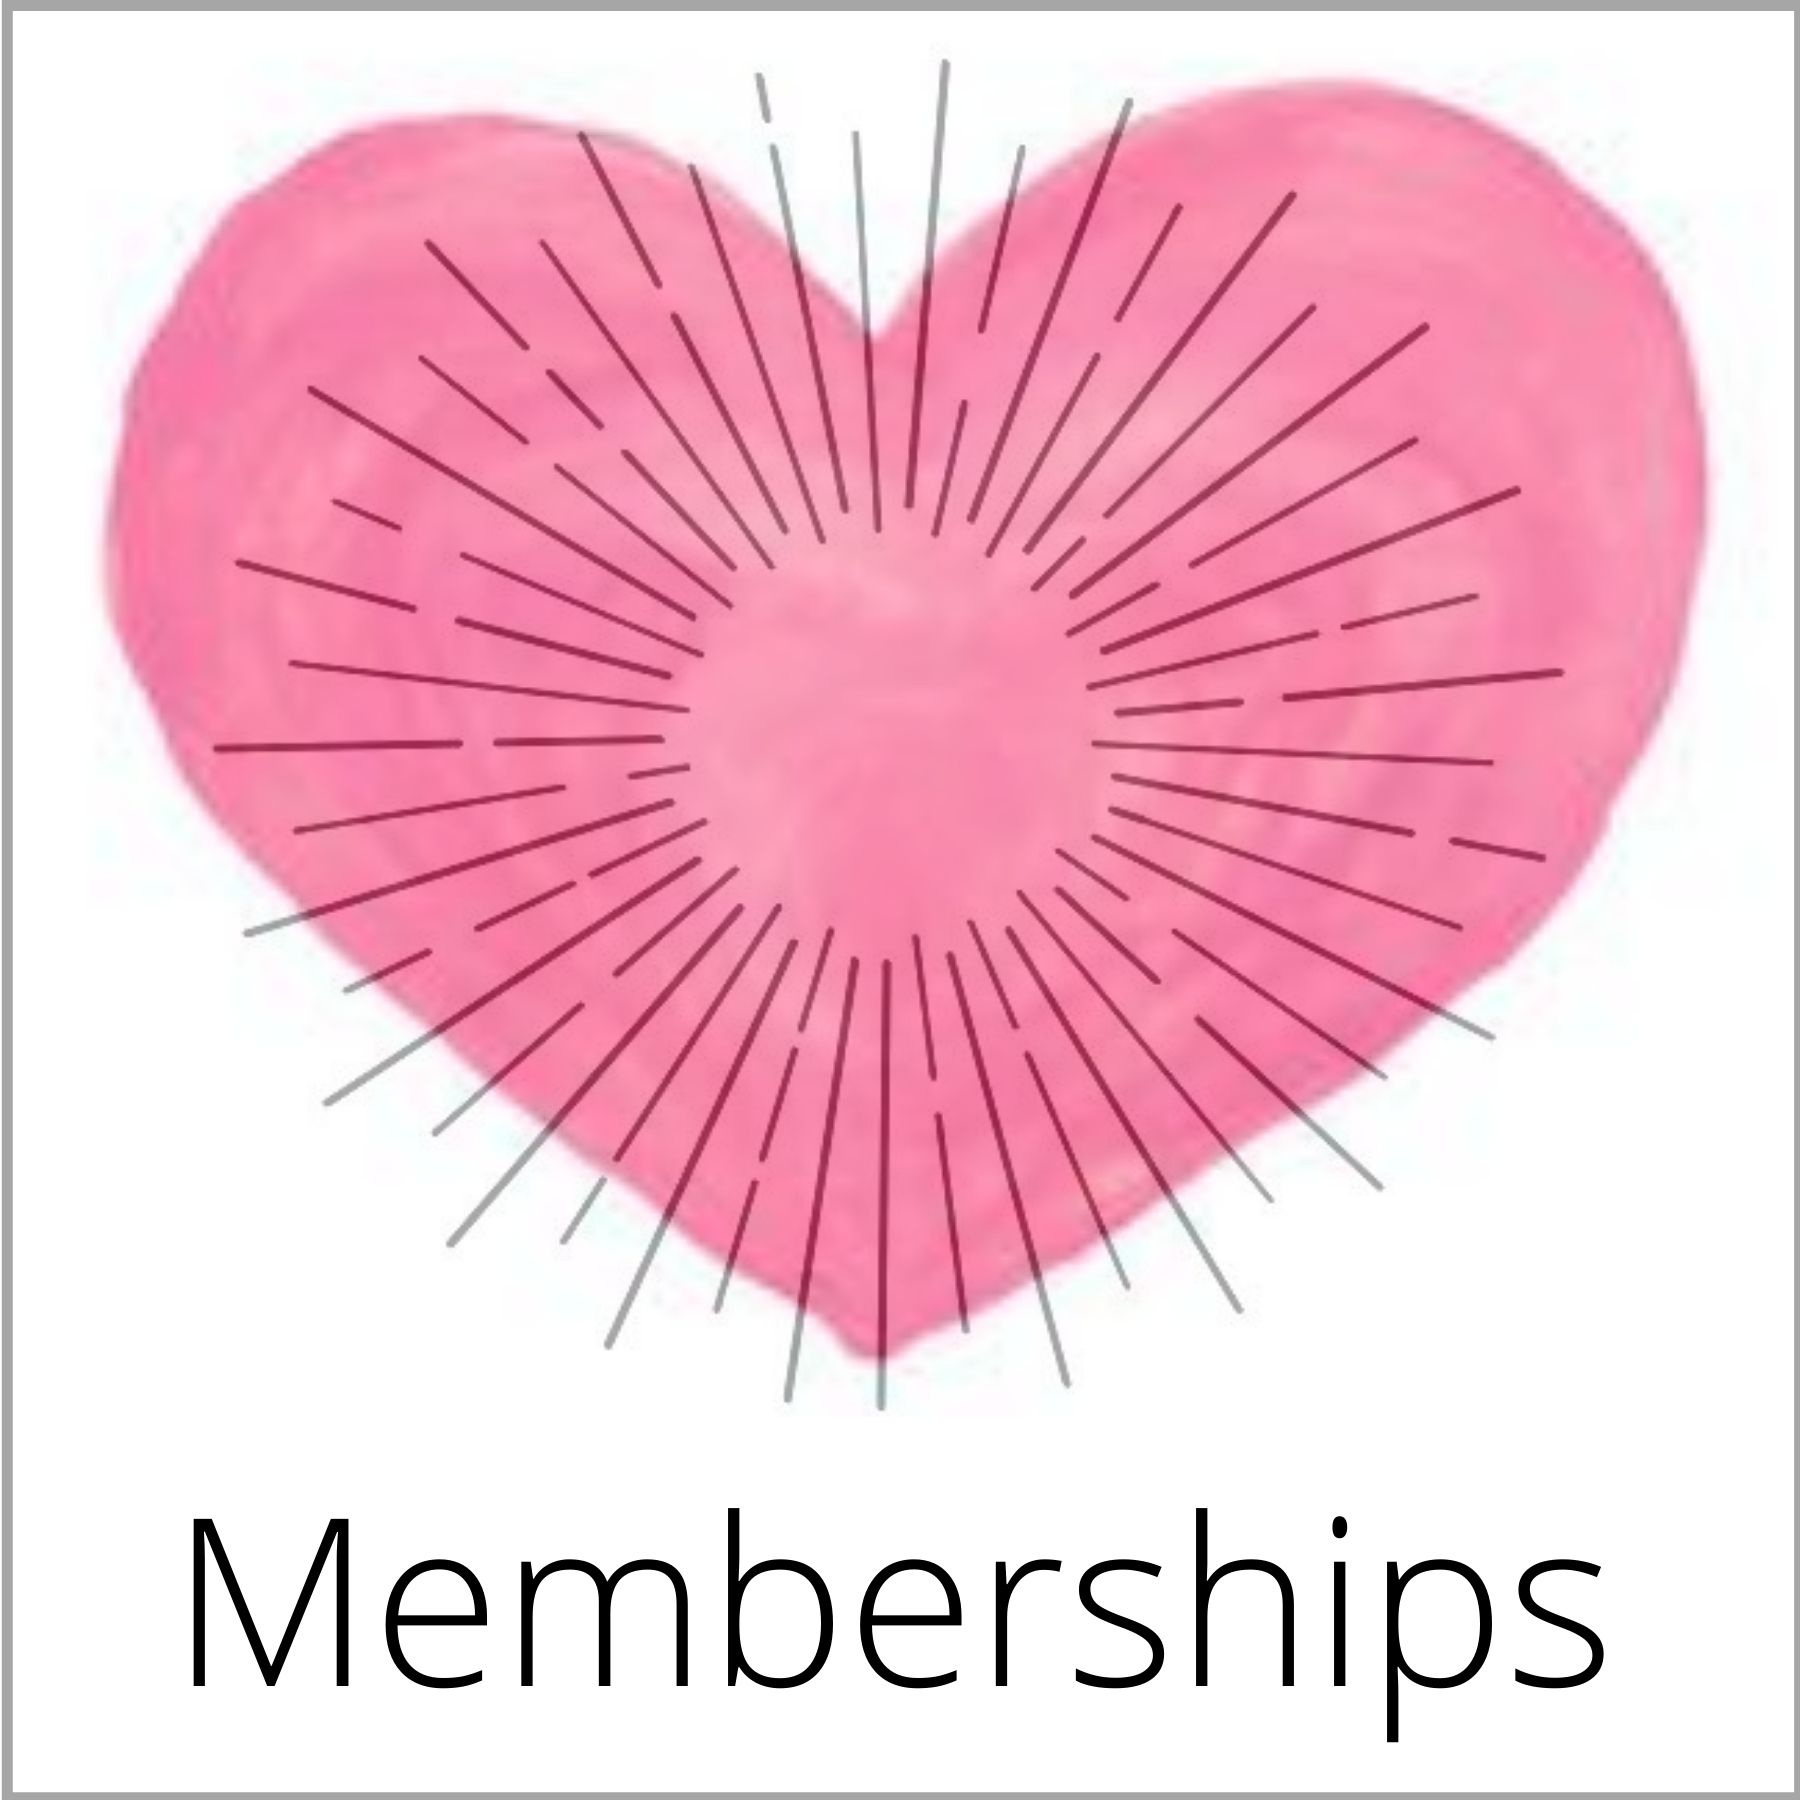 Select a Membership that suits your needs!